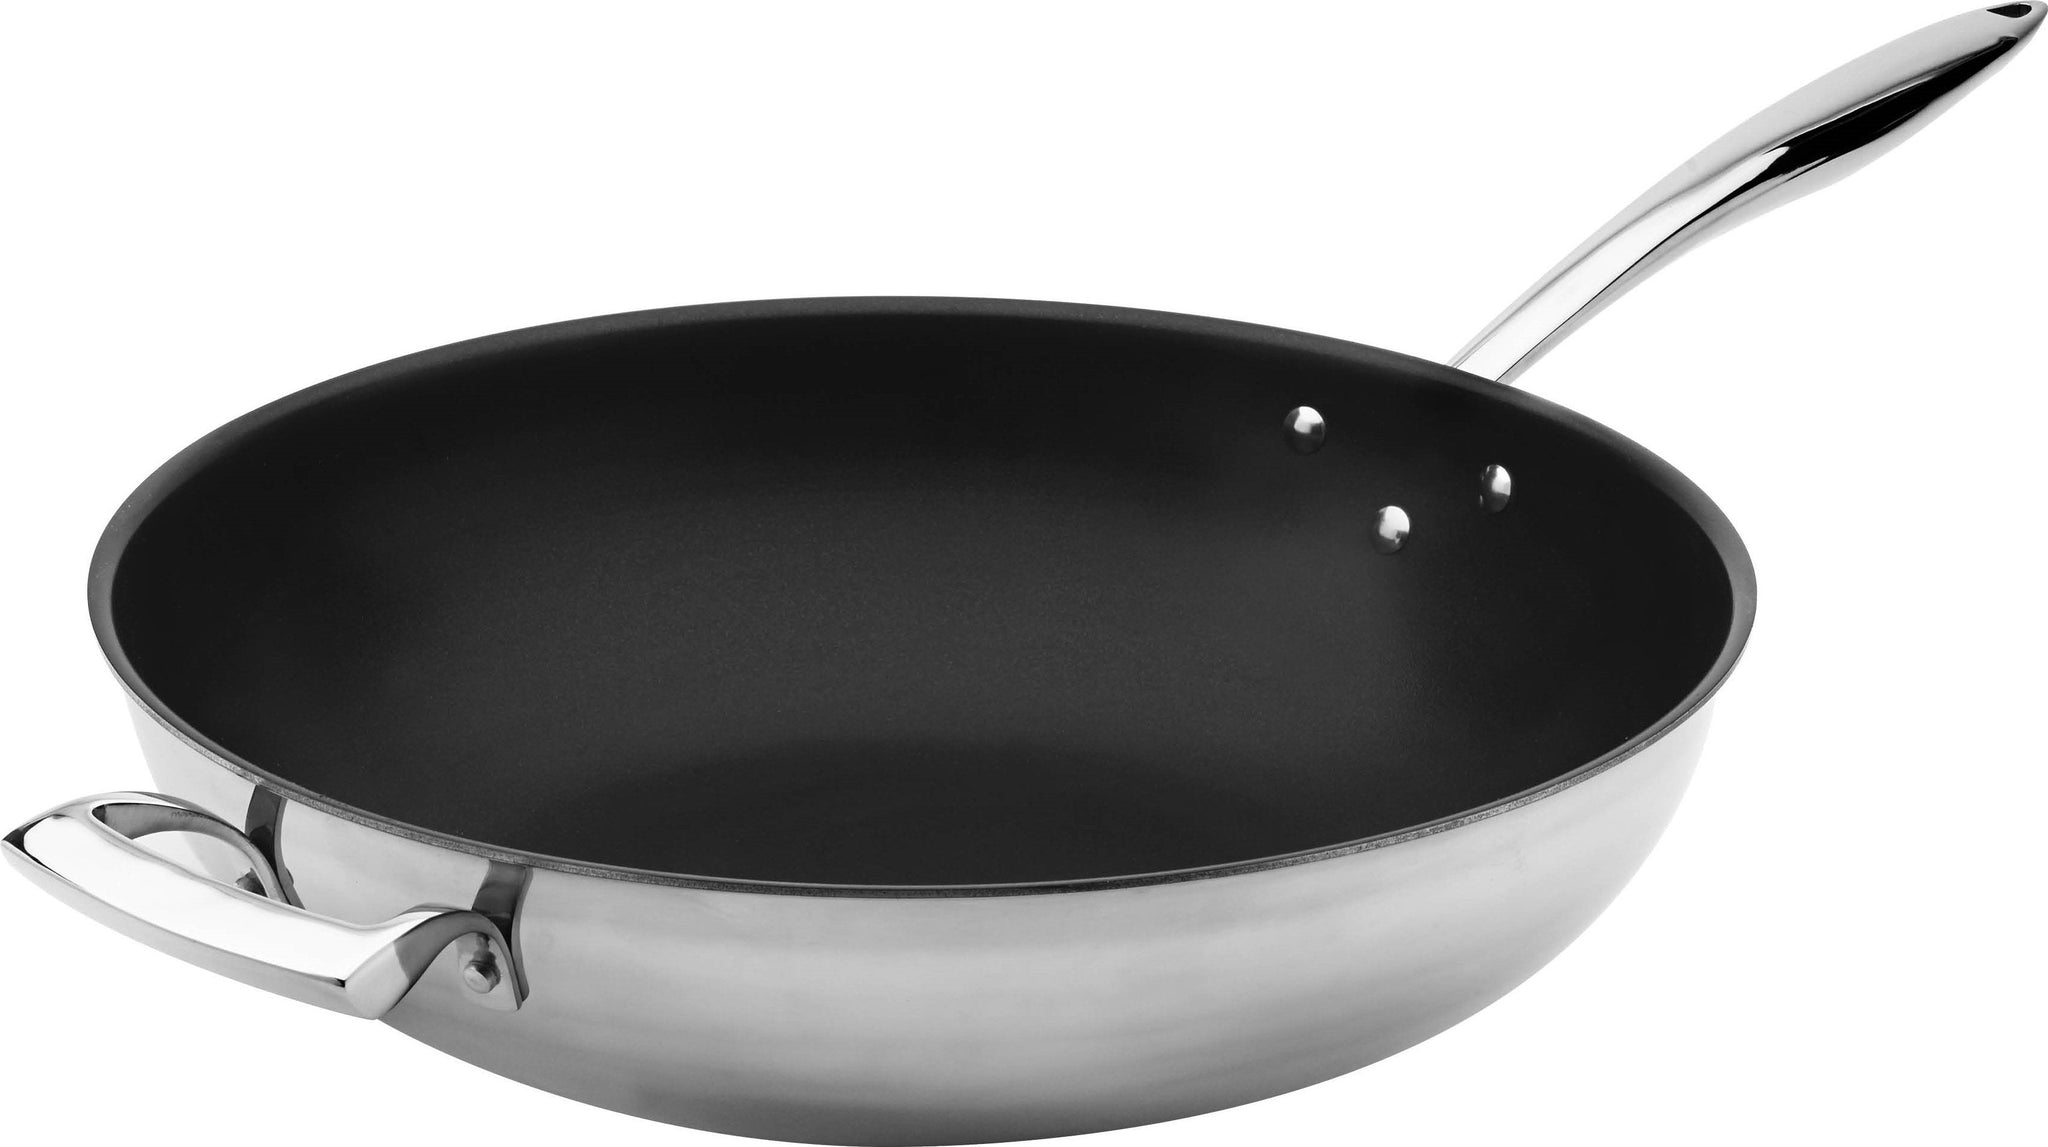 Thermalloy - 12" Tri-Ply Stainless Steel Non-Stick Wok - 5724102